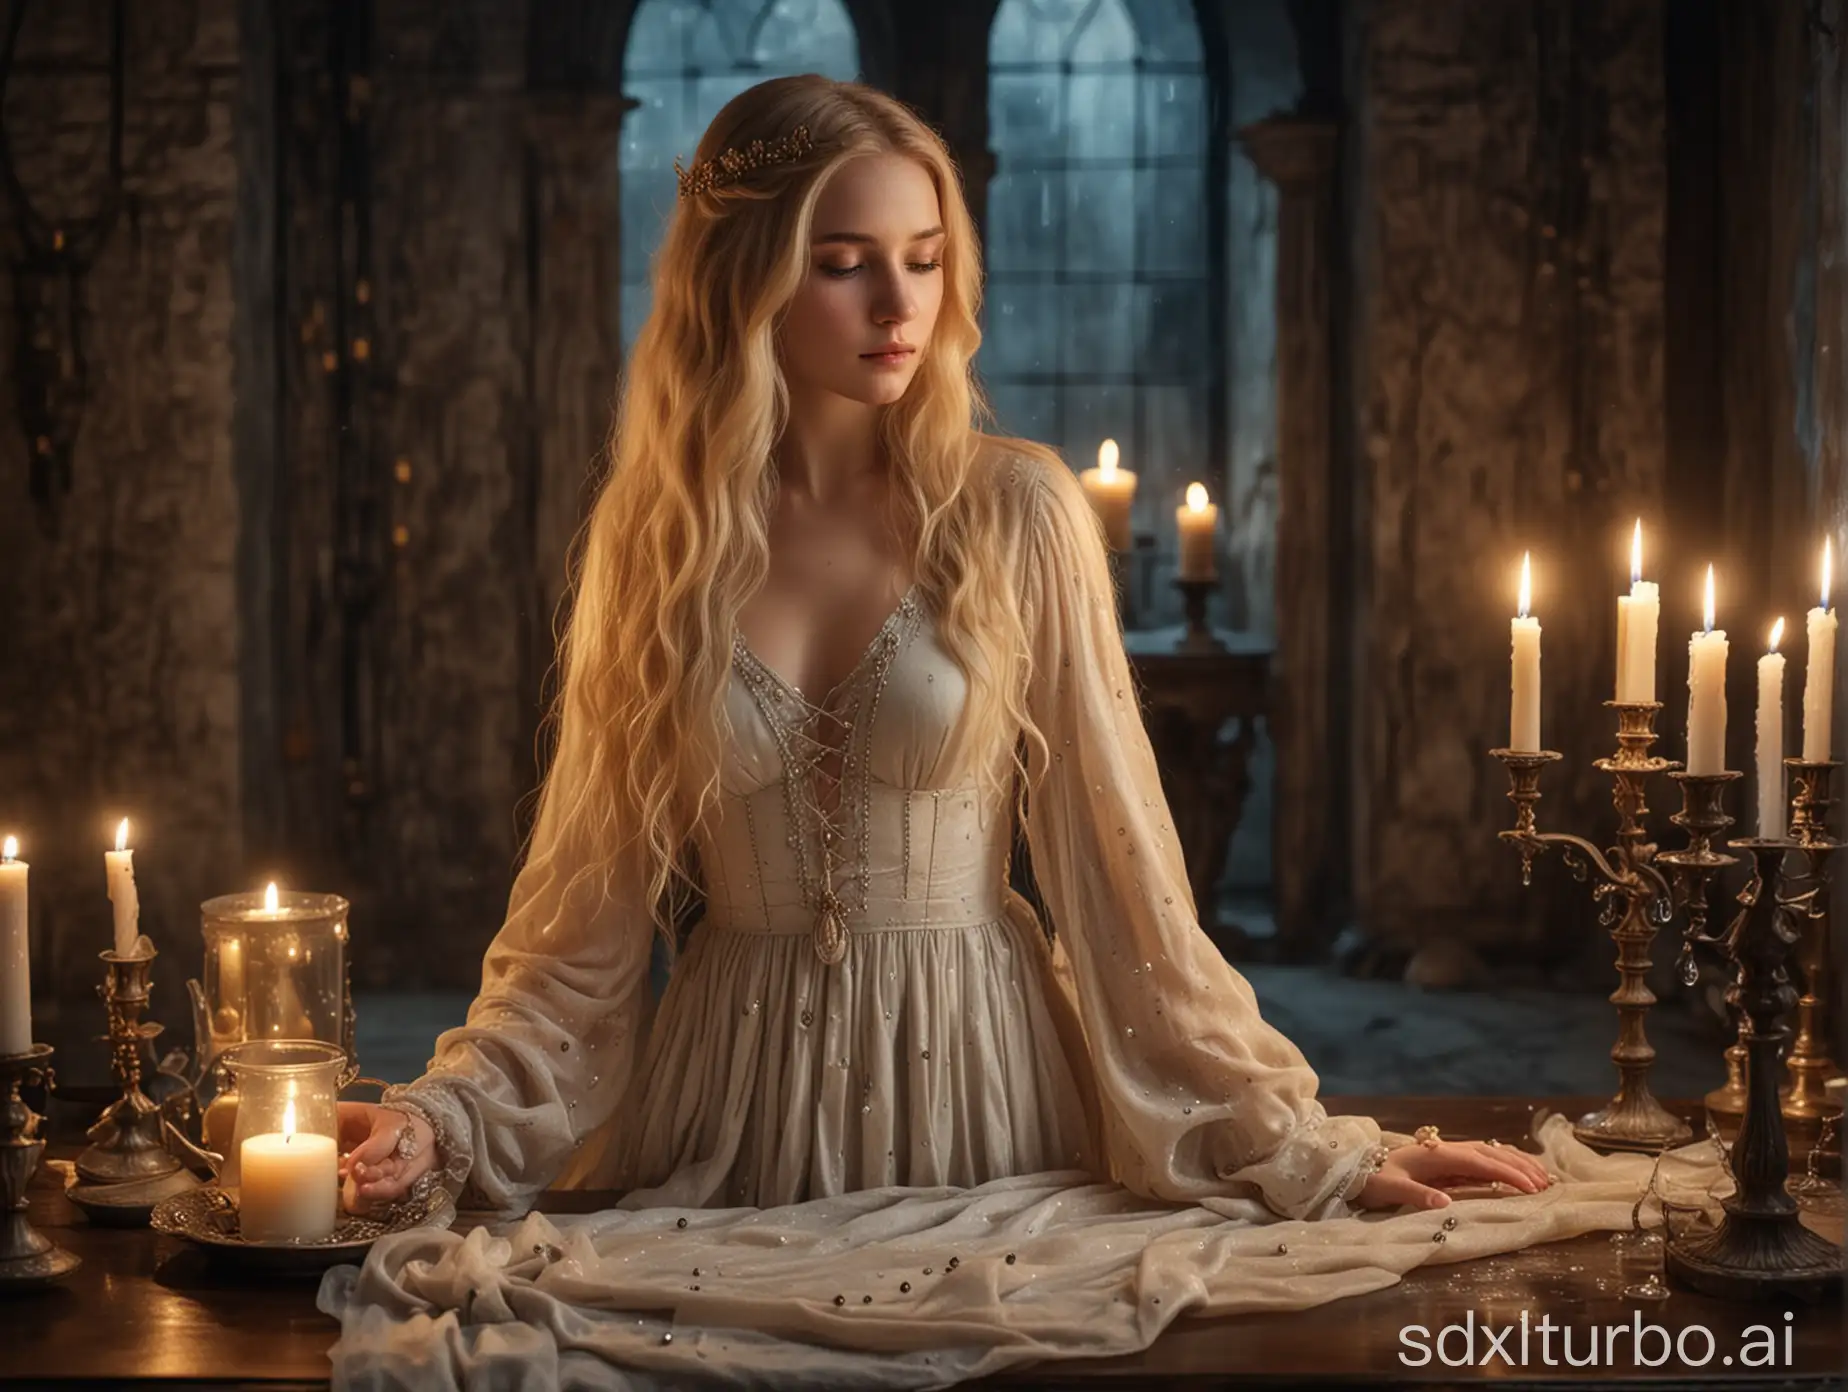 A beautiful girl with long blonde hair, slightly curling at the ends, wearing a delicate pale-pale medieval dress with a deep neckline holds a transparent cup with water and drops on the glass, in a mysterious room with candles and mystical artifacts on the table,